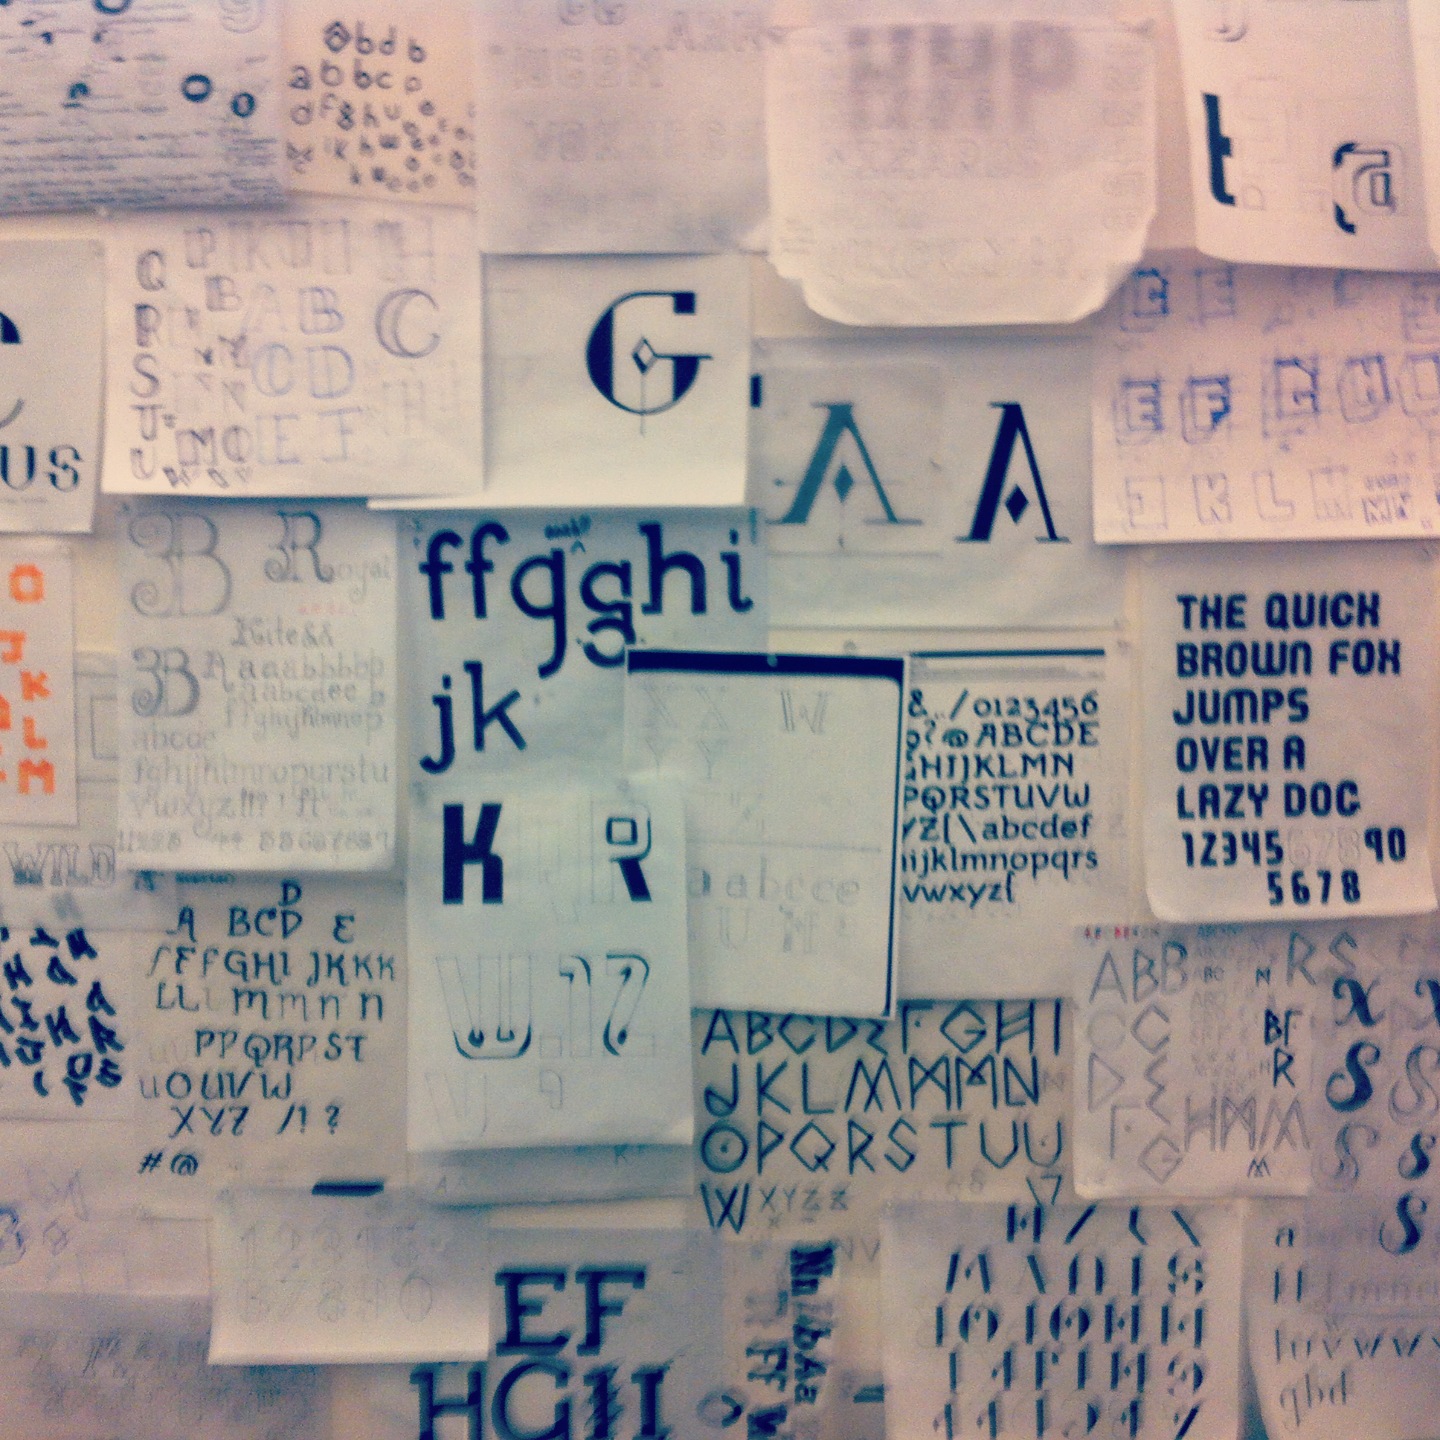 7 years of student sketches for the CCA Digital Type Studio